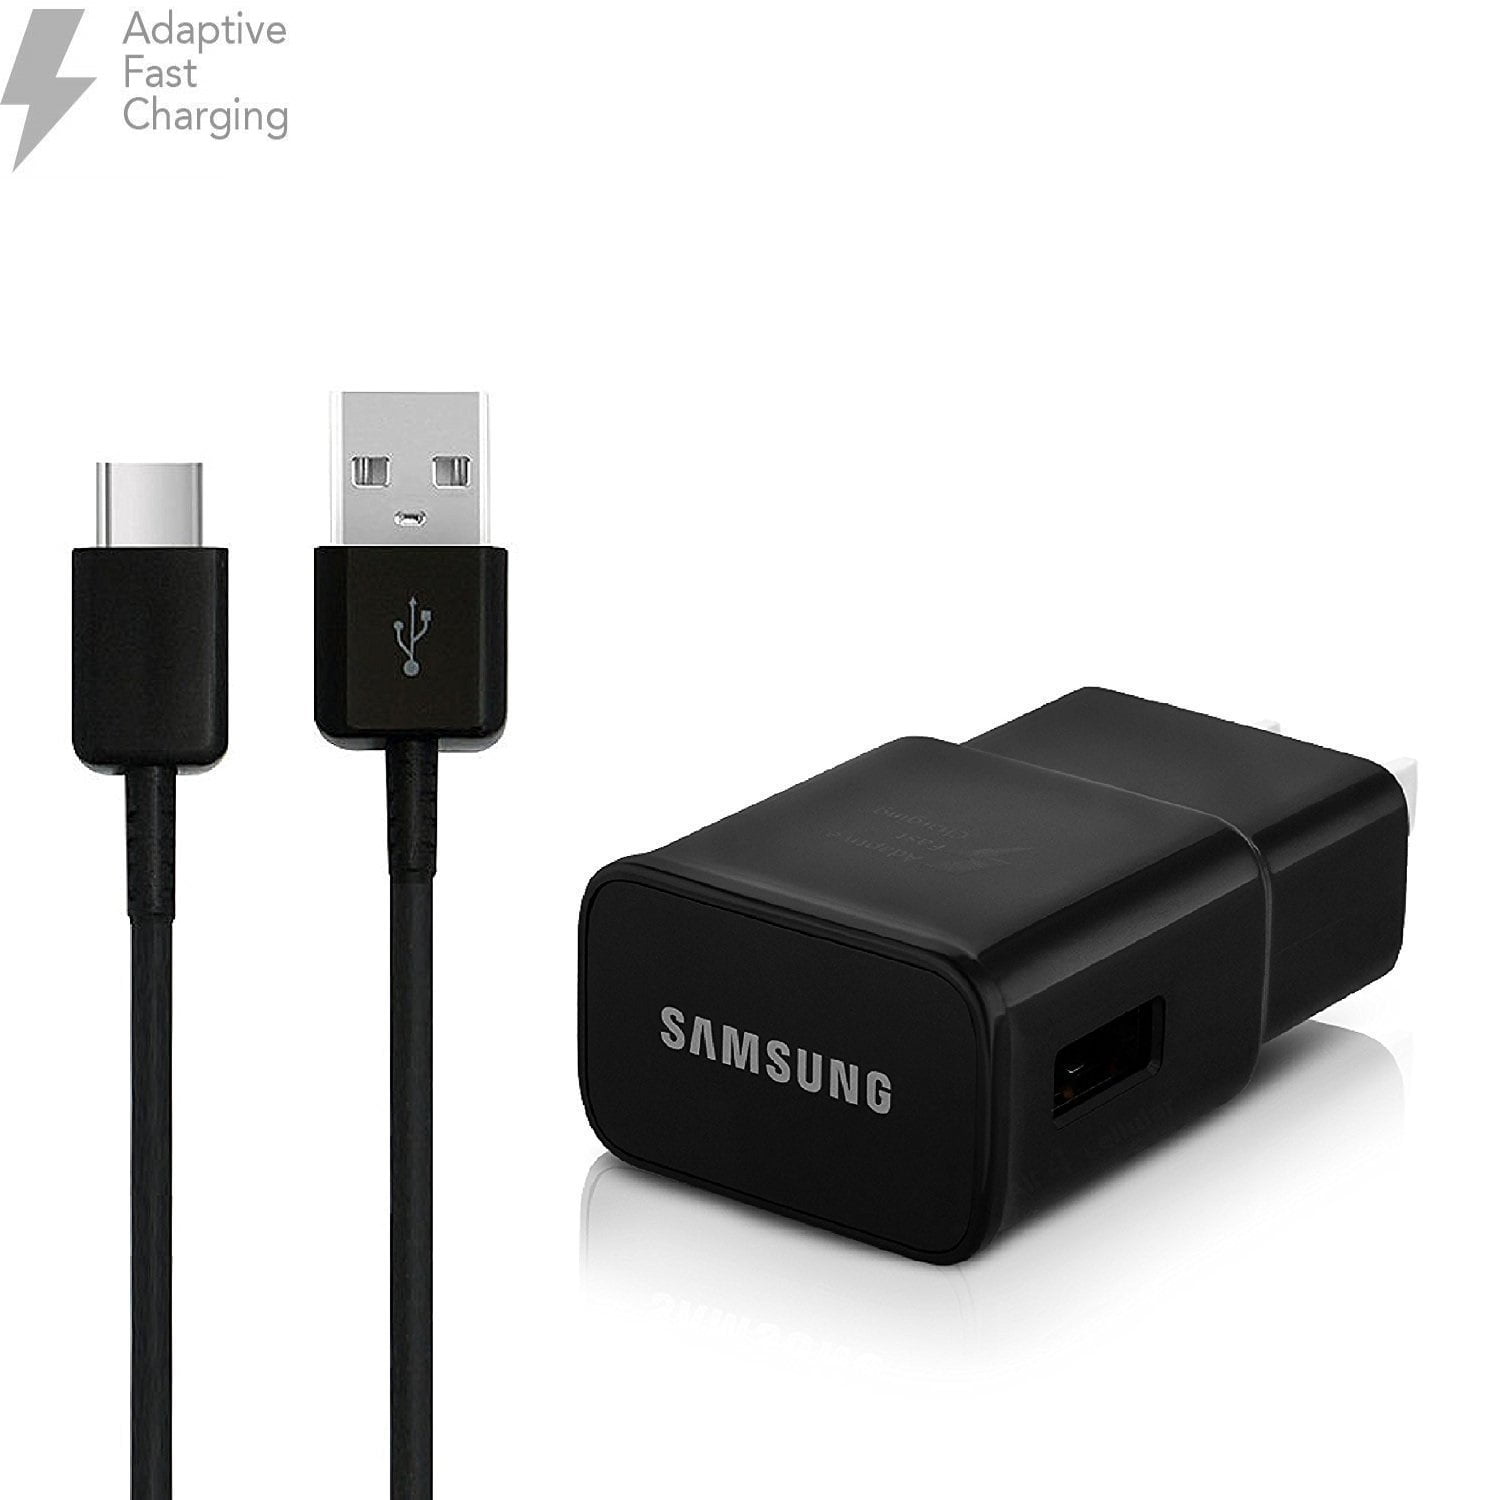 det kan Menstruation Enlighten OEM Samsung Galaxy S8 S8+ S9 S9+ S10 Note 8 Note 9 Adaptive Fast Charger USB-C  3.1 Type-C Cable Kit Fast Charging USB Wall Charger AC Home Power Adapter  [1 Wall Charger +